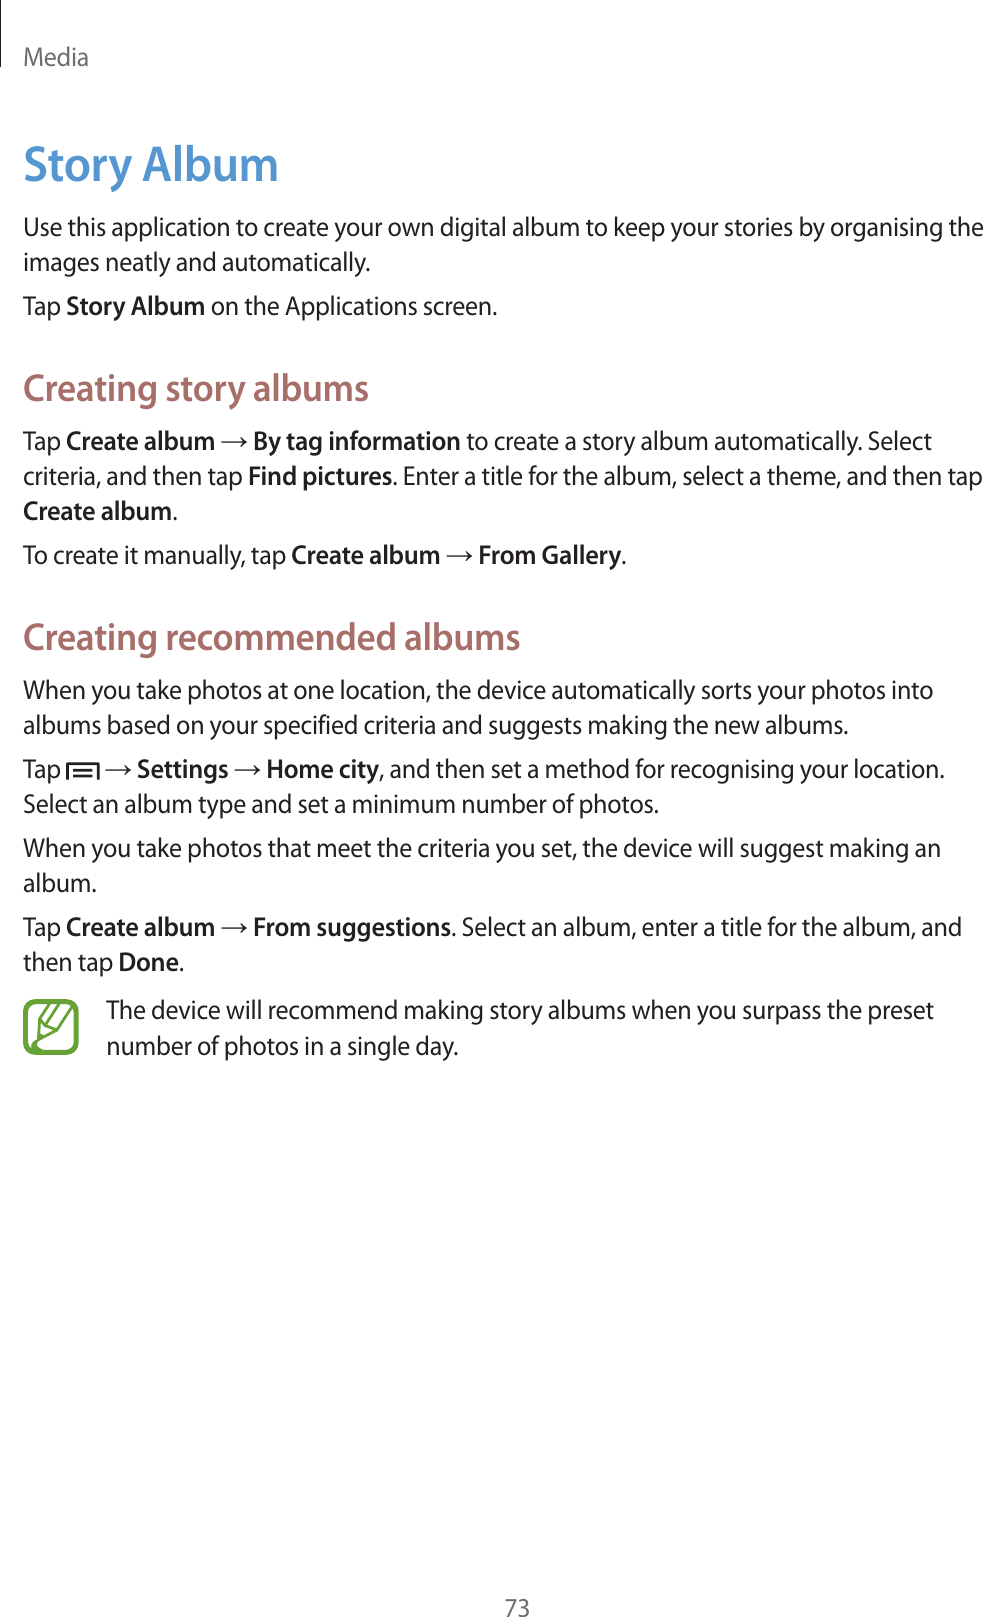 Media73Story AlbumUse this application to create your own digital album to keep your stories by organising the images neatly and automatically.Tap Story Album on the Applications screen.Creating story albumsTap Create album ĺ By tag information to create a story album automatically. Select criteria, and then tap Find pictures. Enter a title for the album, select a theme, and then tap Create album.To create it manually, tap Create album ĺ From Gallery.Creating recommended albumsWhen you take photos at one location, the device automatically sorts your photos into albums based on your specified criteria and suggests making the new albums.Tap   ĺ Settings ĺ Home city, and then set a method for recognising your location. Select an album type and set a minimum number of photos.When you take photos that meet the criteria you set, the device will suggest making an album.Tap Create album ĺ From suggestions. Select an album, enter a title for the album, and then tap Done.The device will recommend making story albums when you surpass the preset number of photos in a single day.